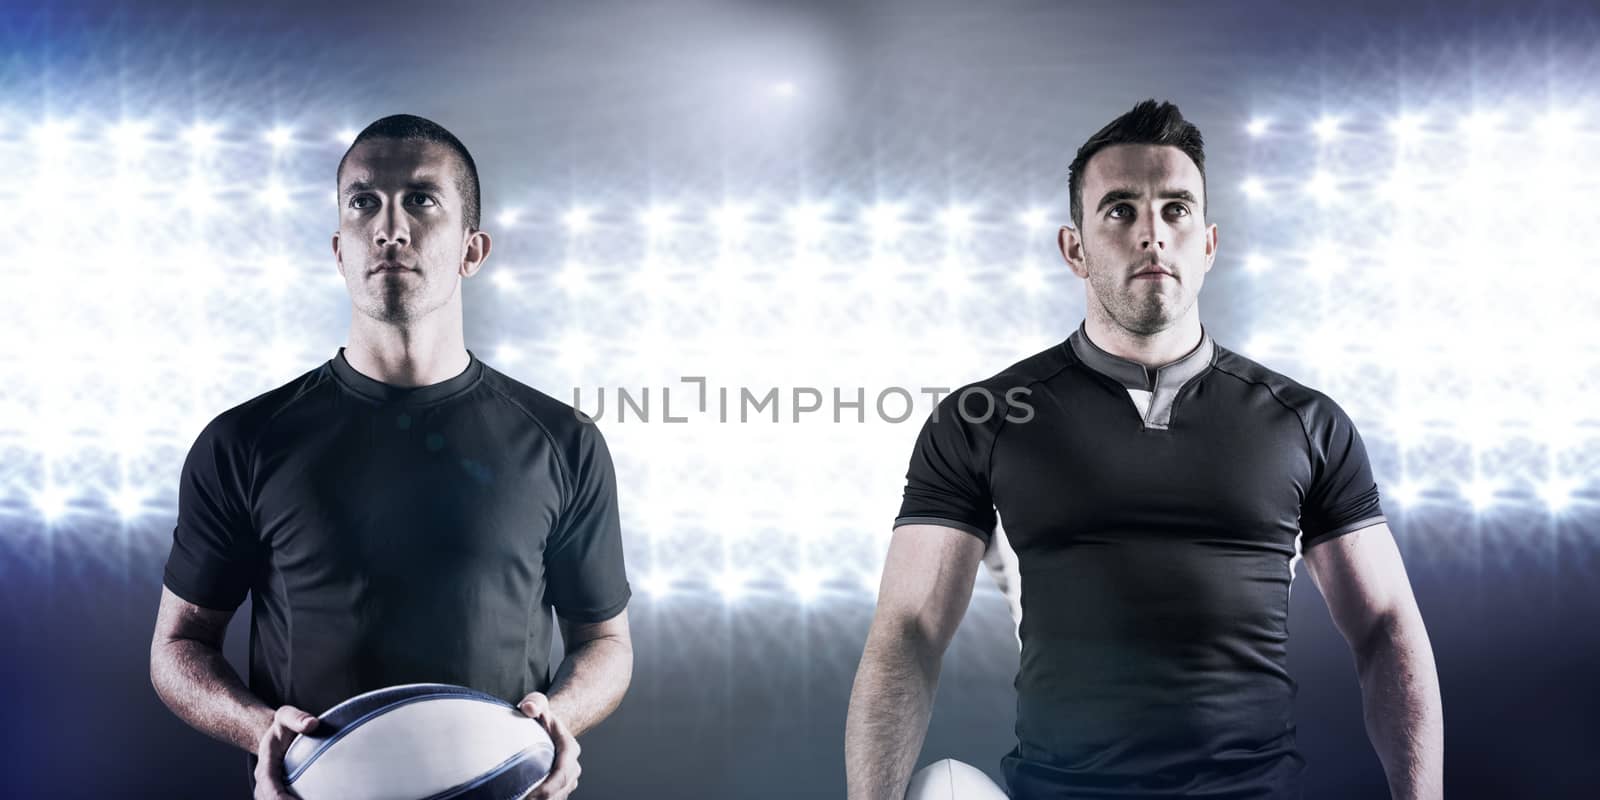 Composite image of tough rugby player holding ball by Wavebreakmedia